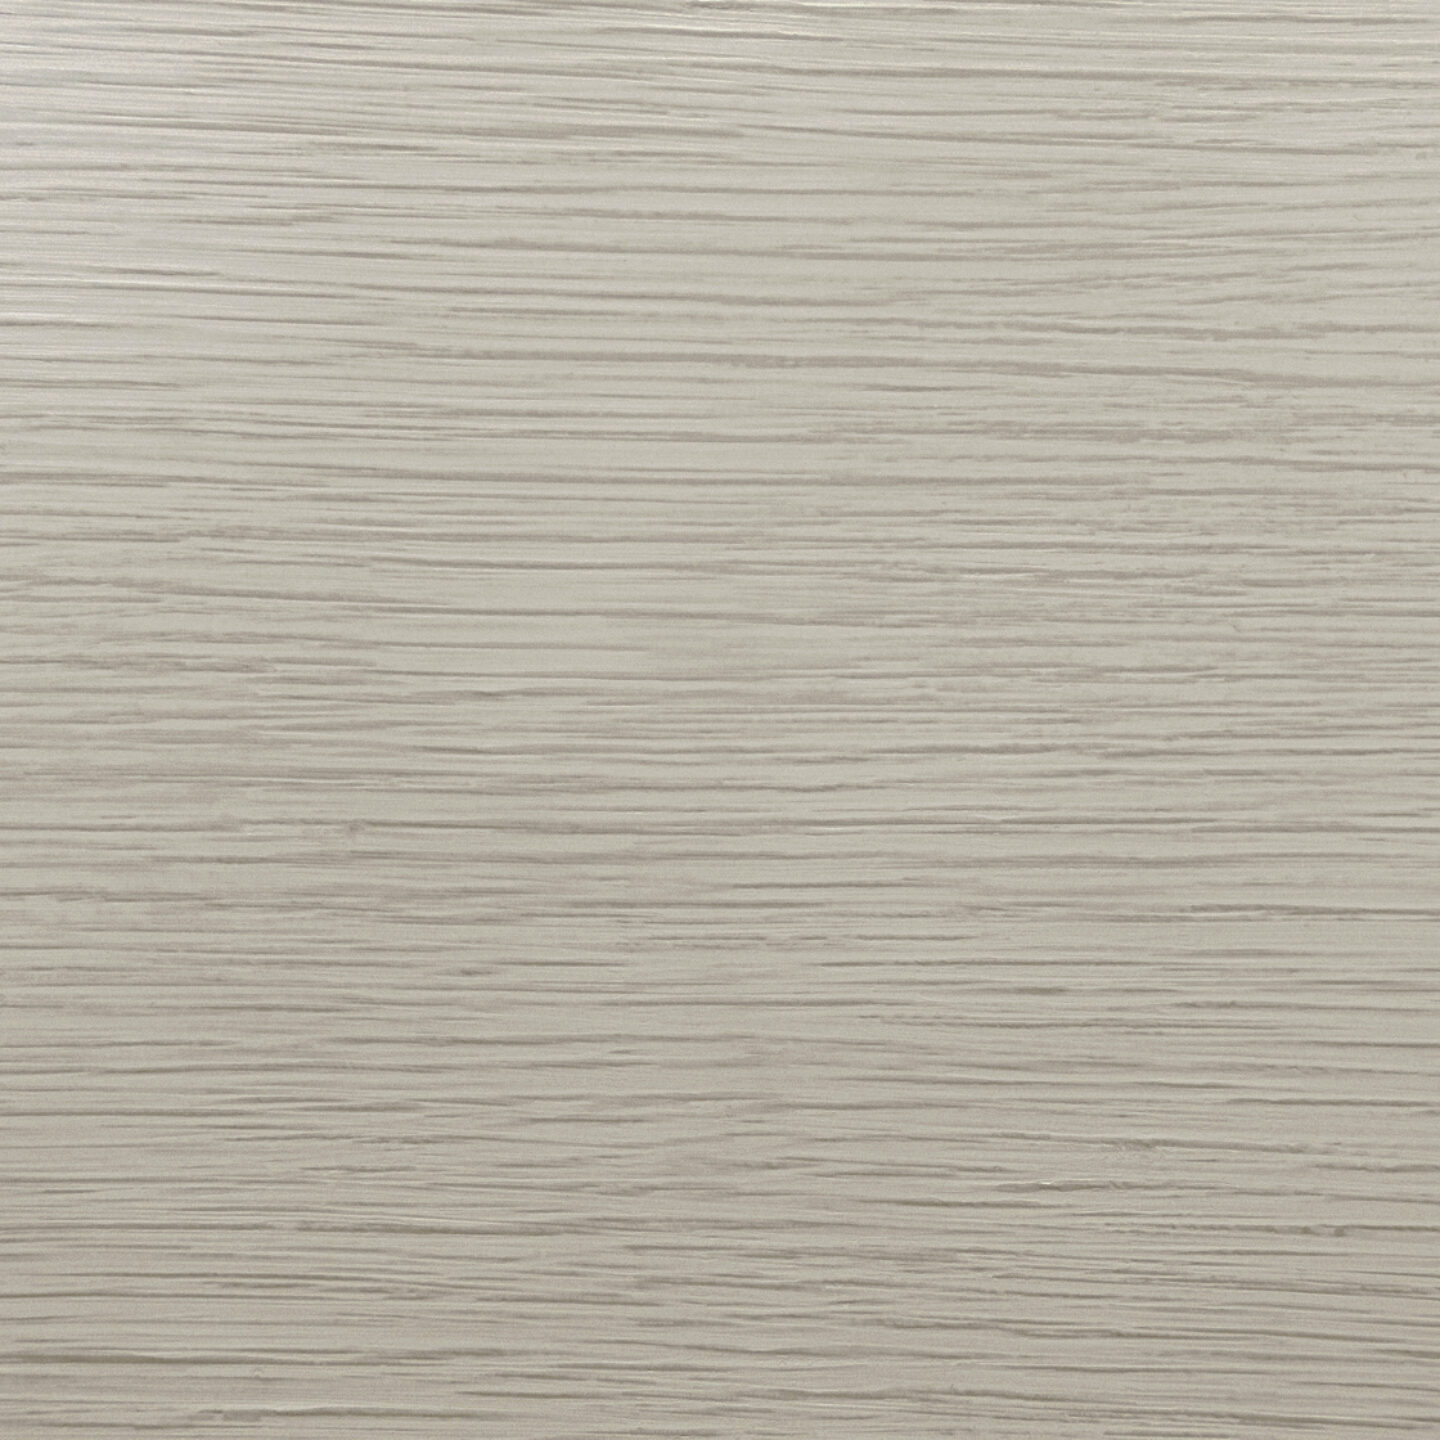 Close up of Armourcoat Striated polished plaster finish - 09